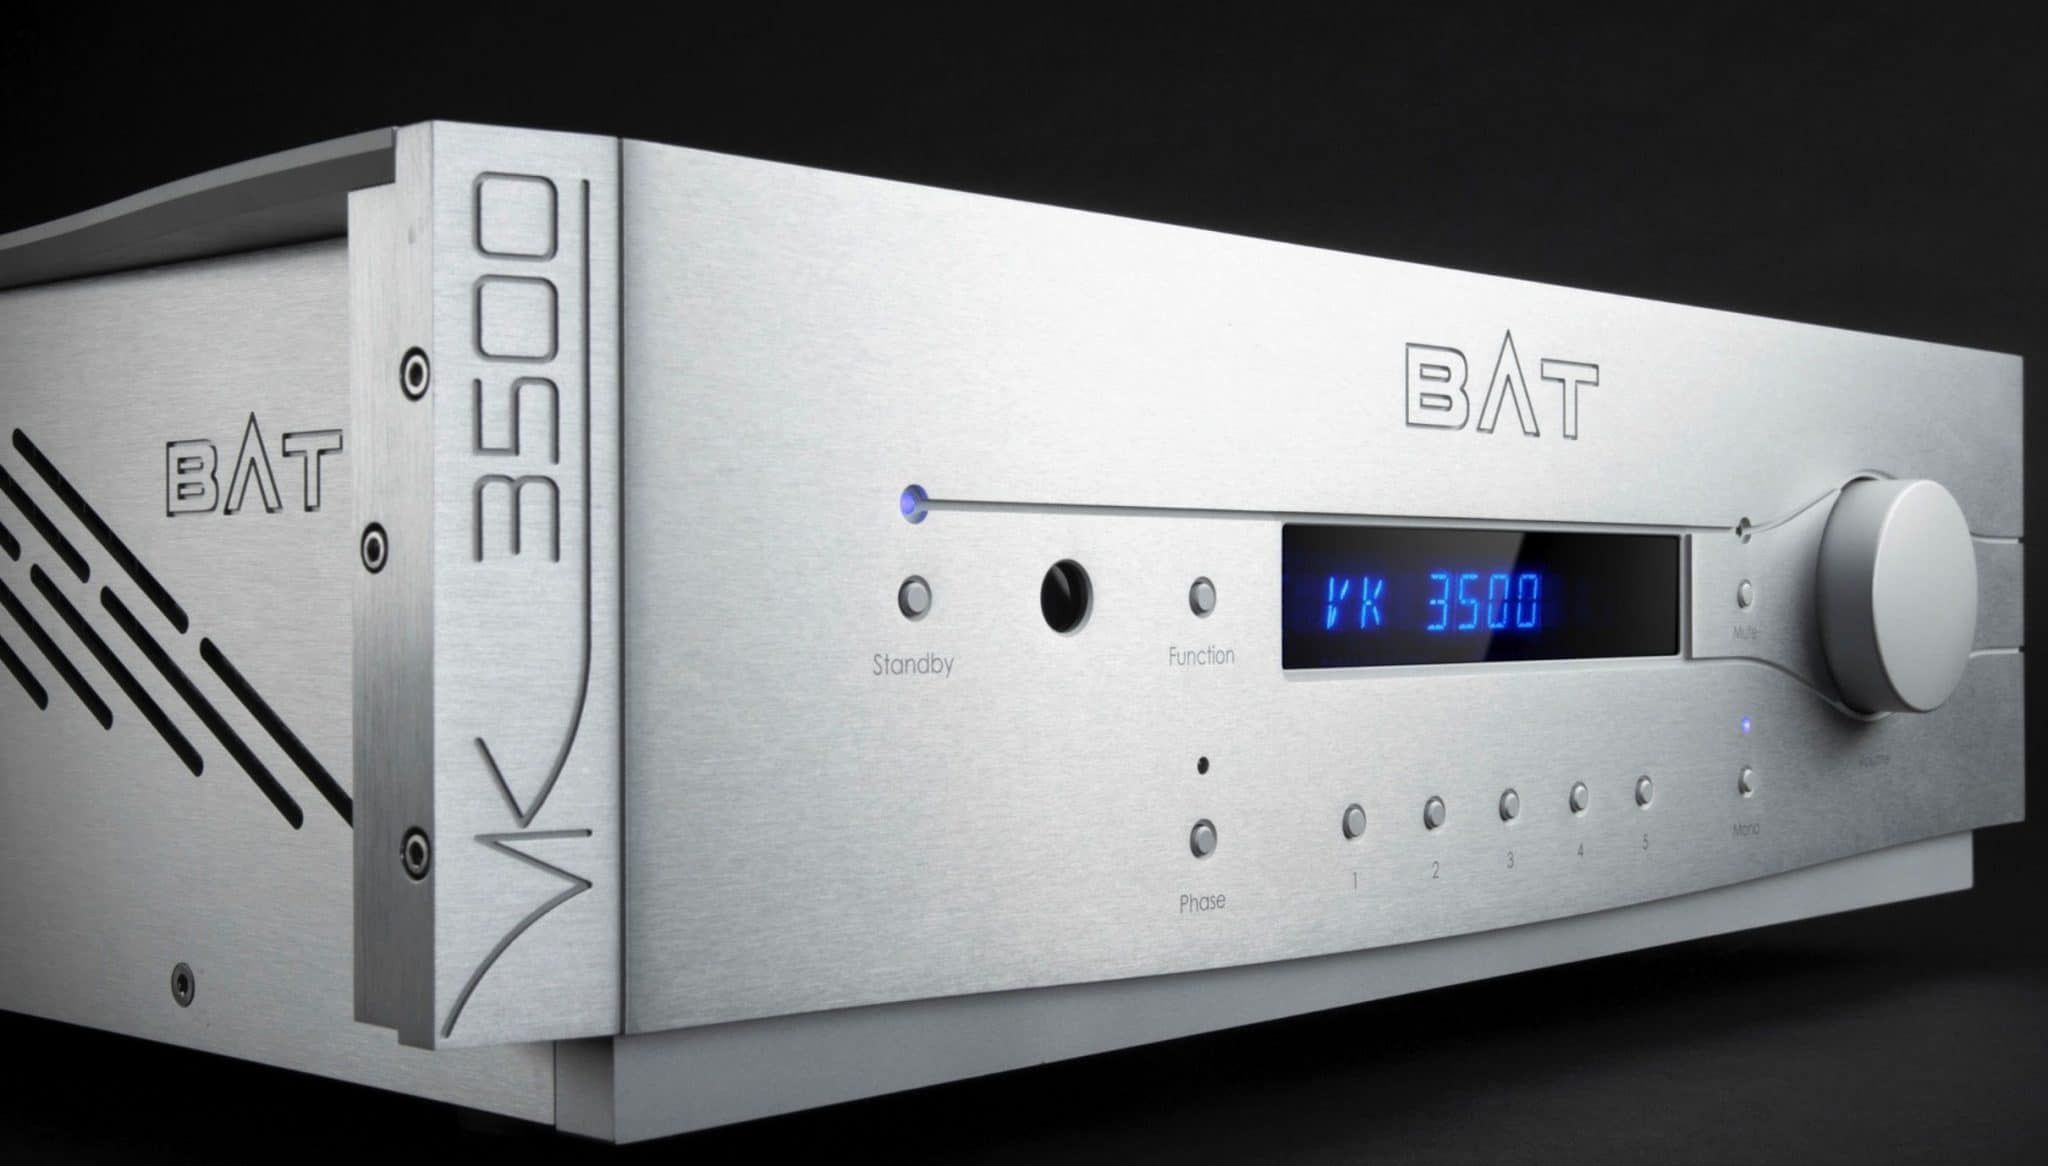 VK3500 Amp From Balanced Audio Technology